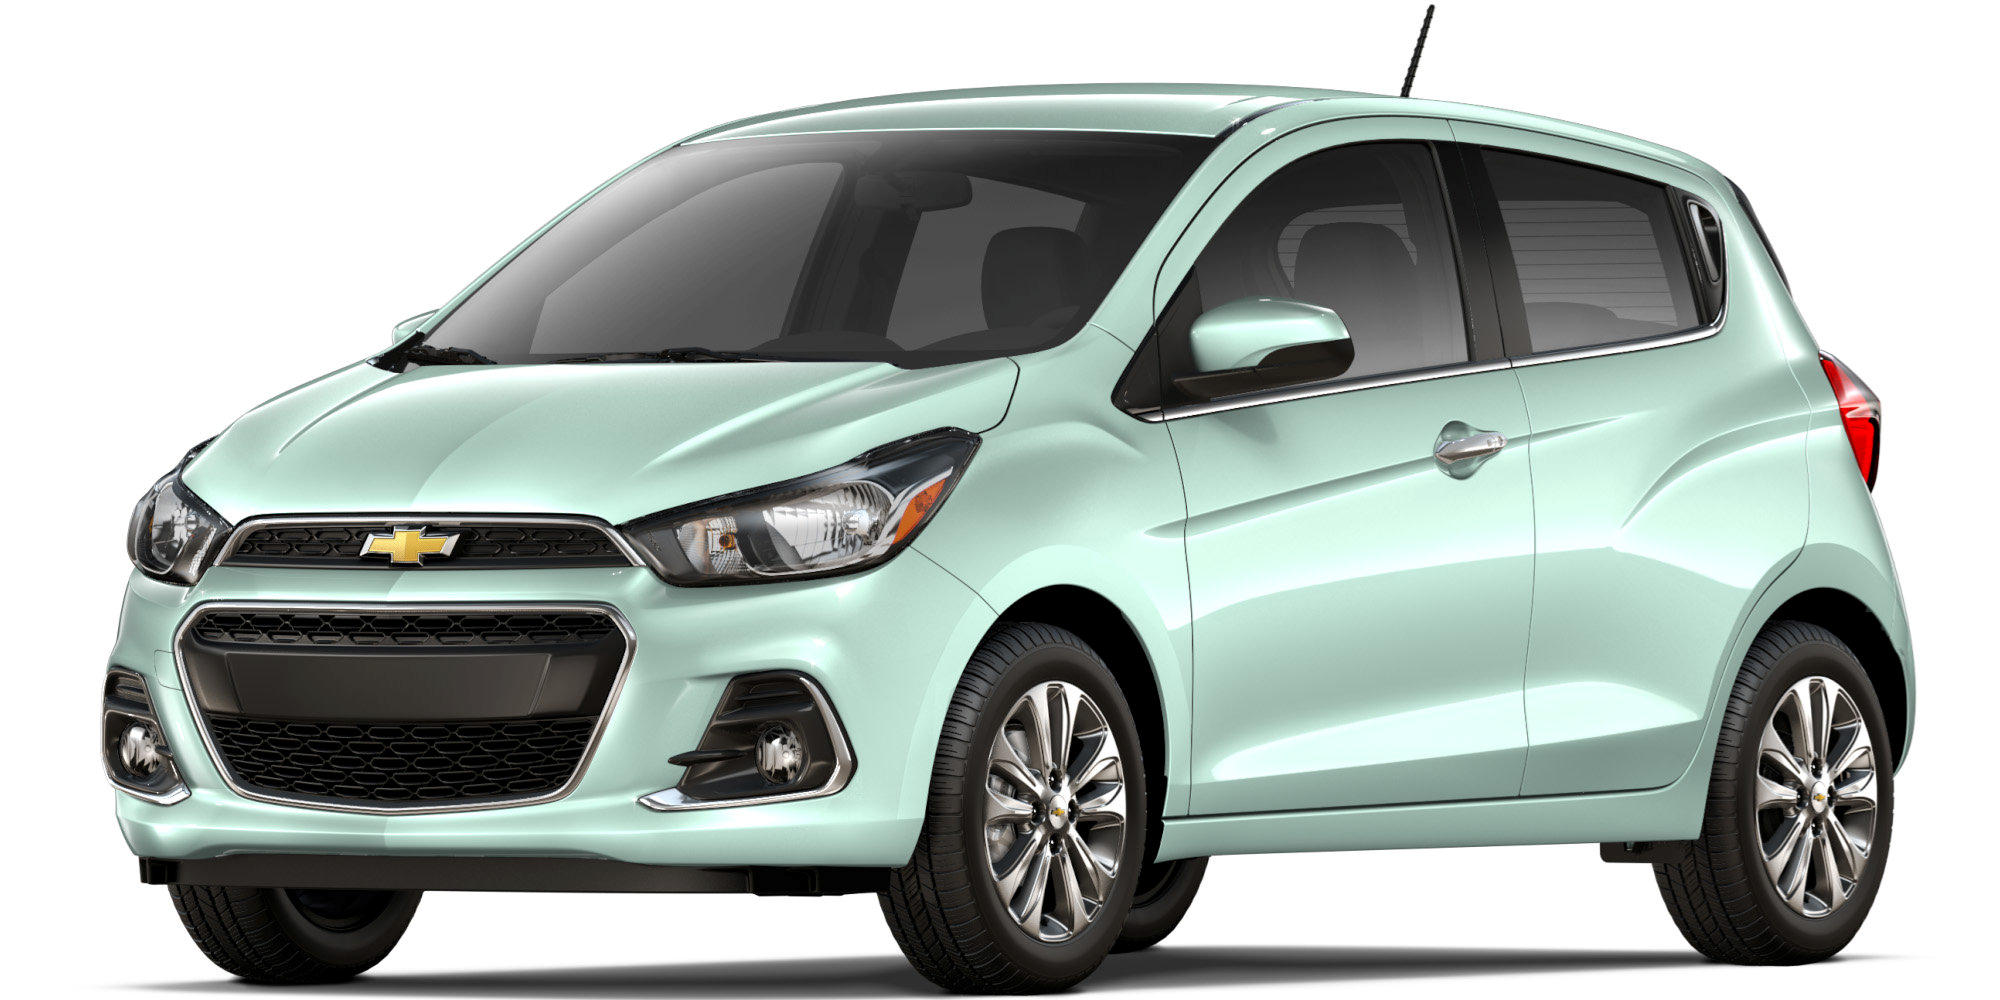 2018 Chevrolet Spark LS Full Specs, Features and Price | CarBuzz